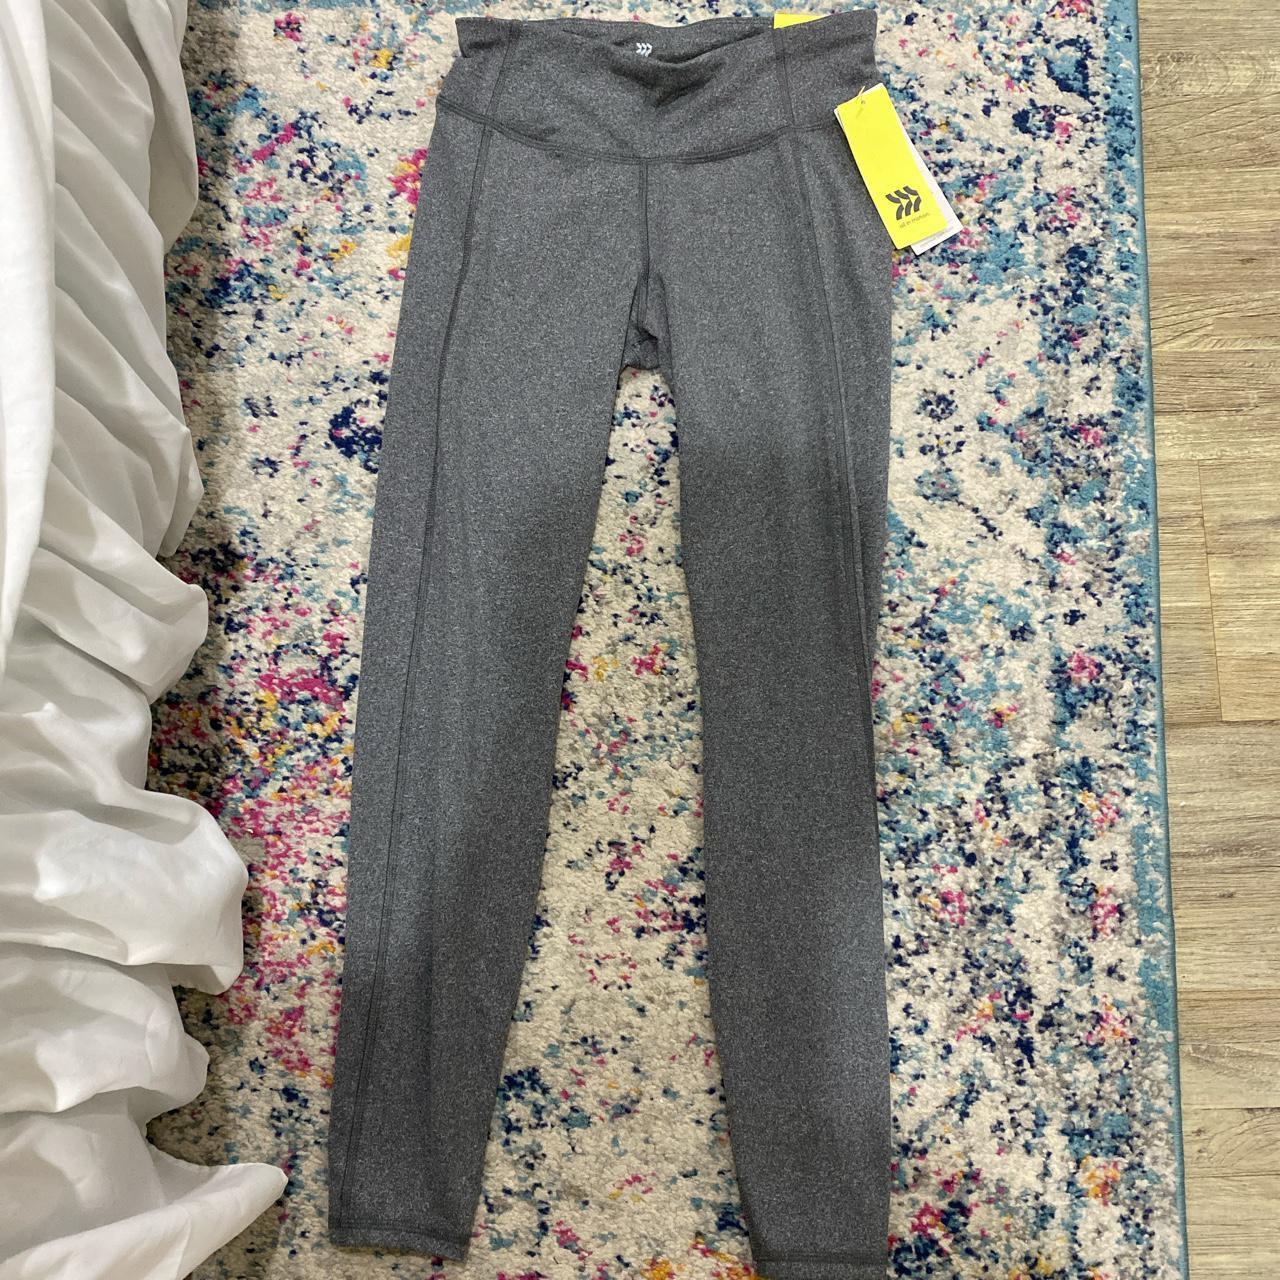 All In Motion activewear leggings with pockets and - Depop